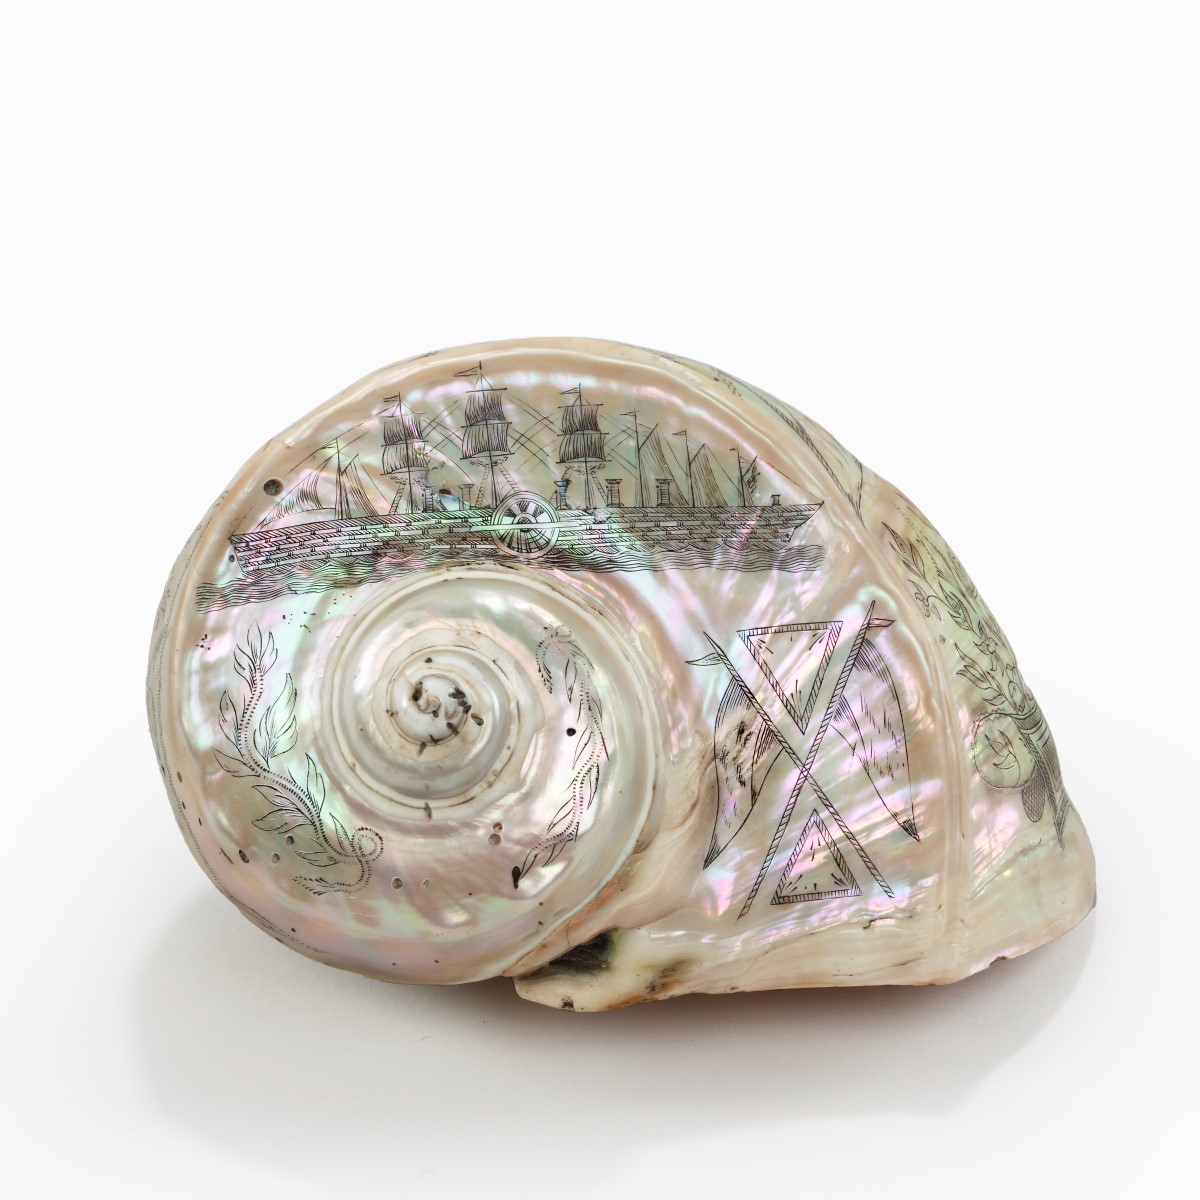 A scrimshaw turban shell carved with the Leviathan